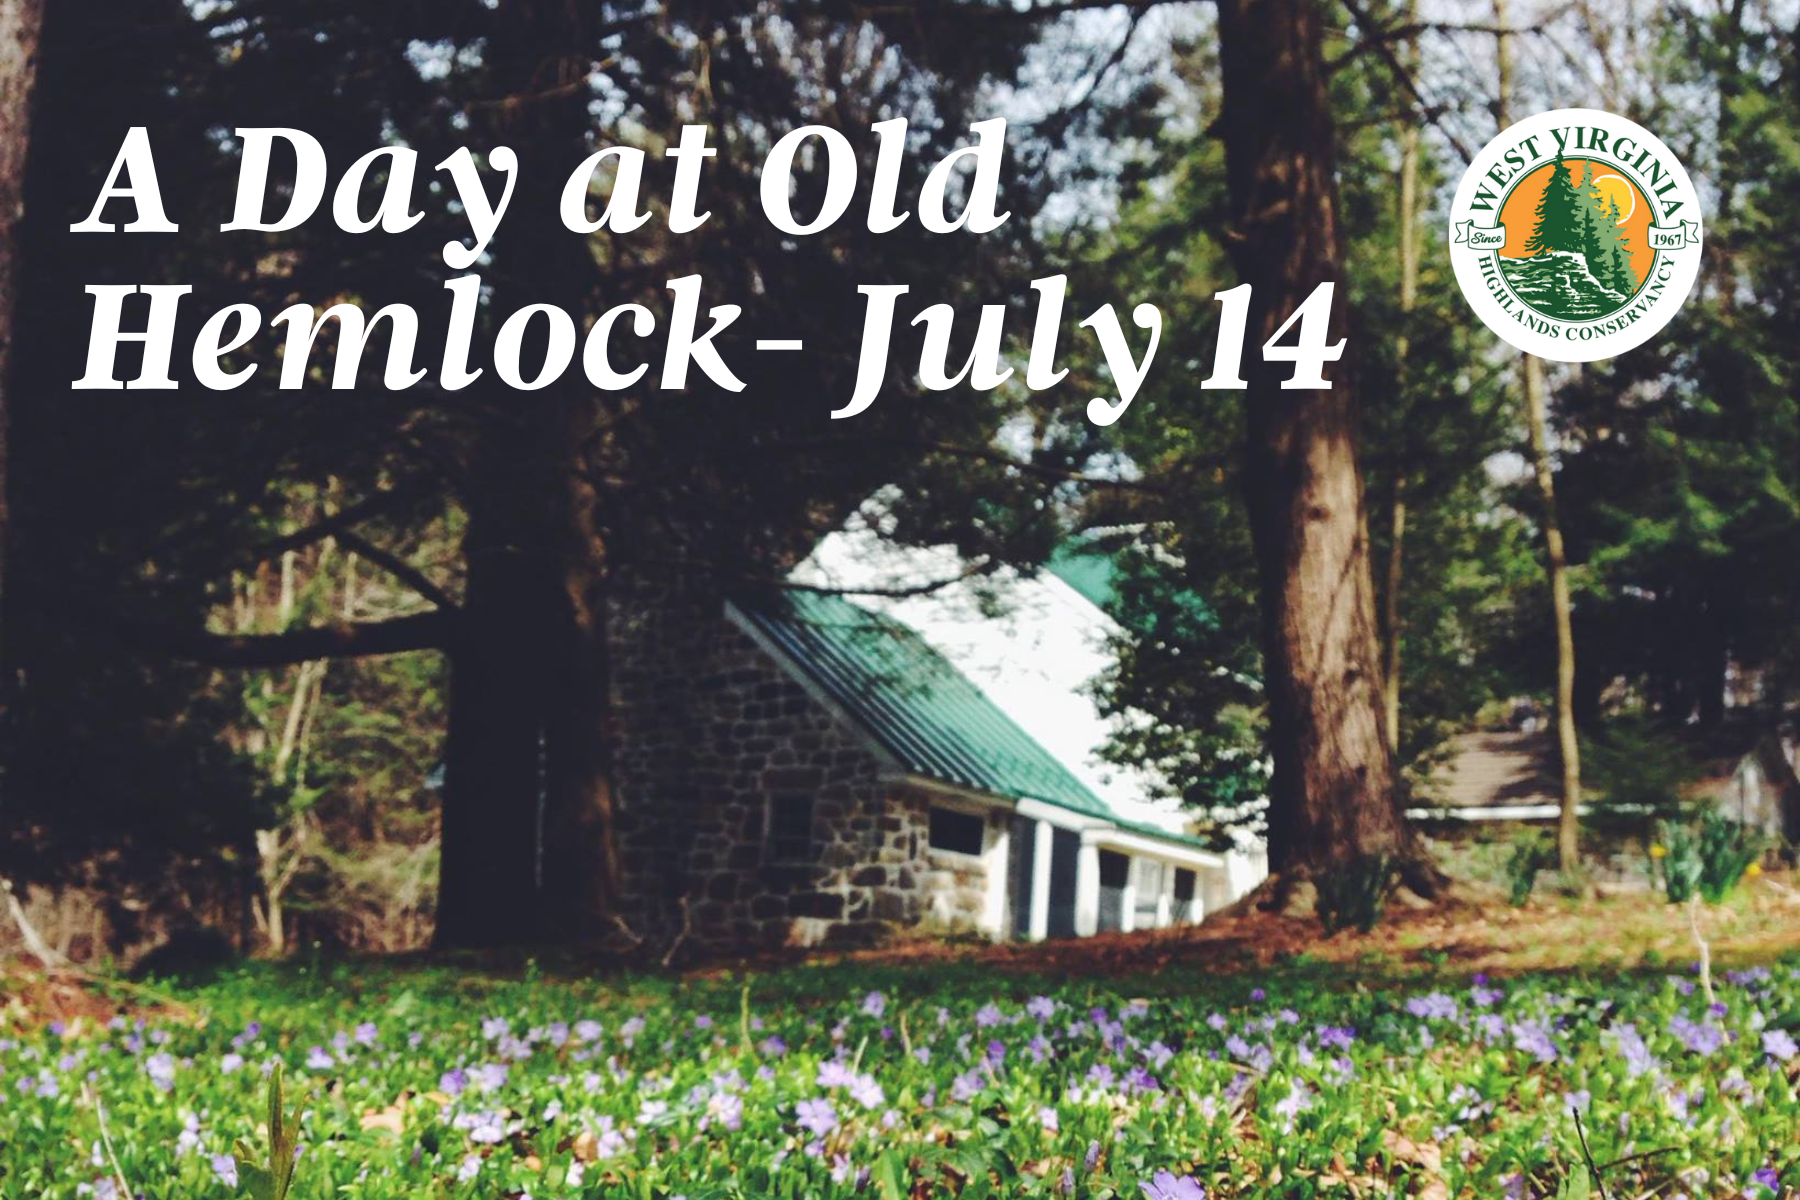 A Day at Old Hemlock: July 14